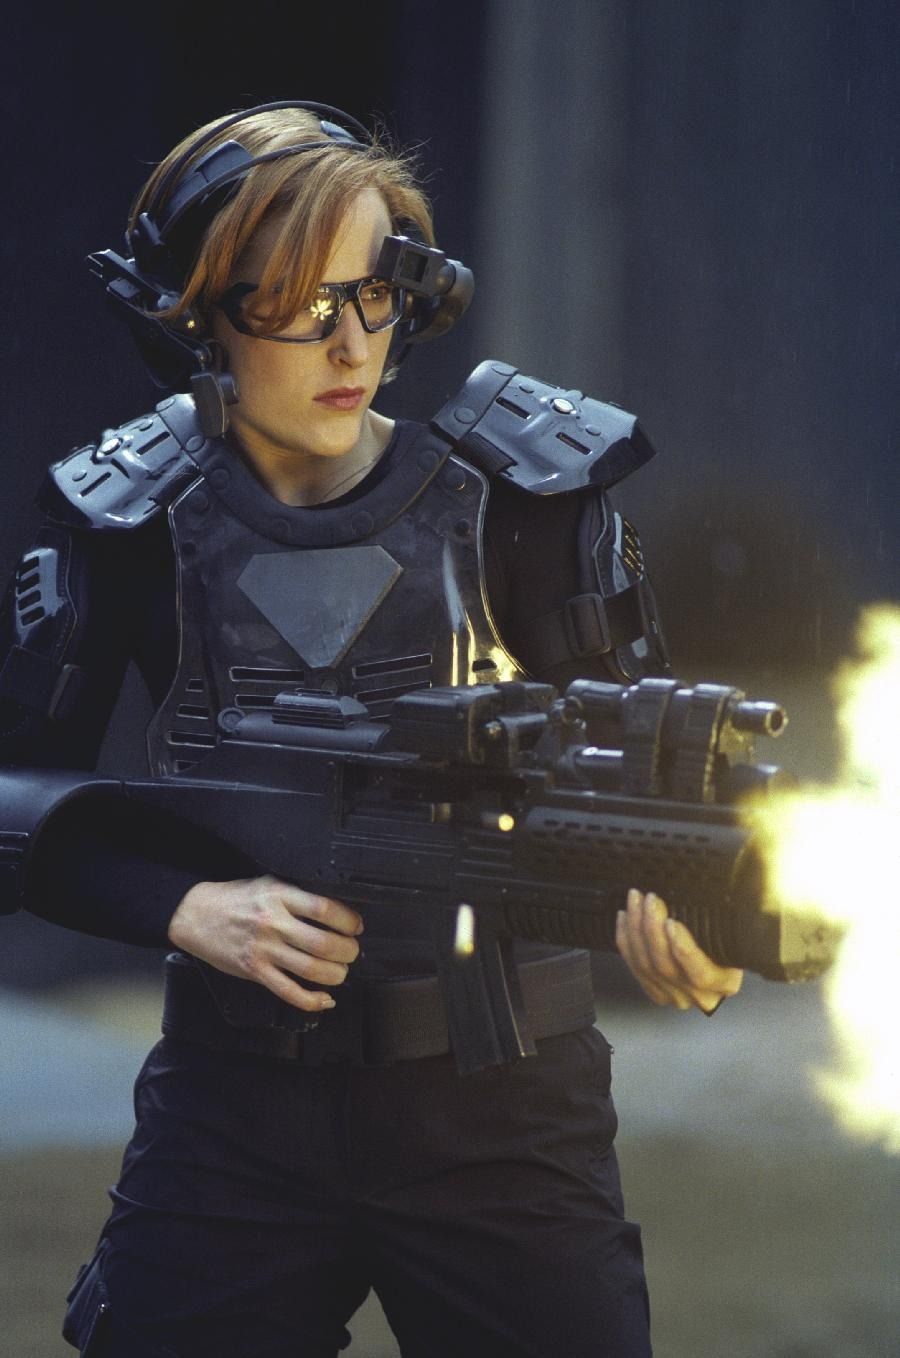 Scully fires a large automatic weapon while wearing a VR headset and other game gear.